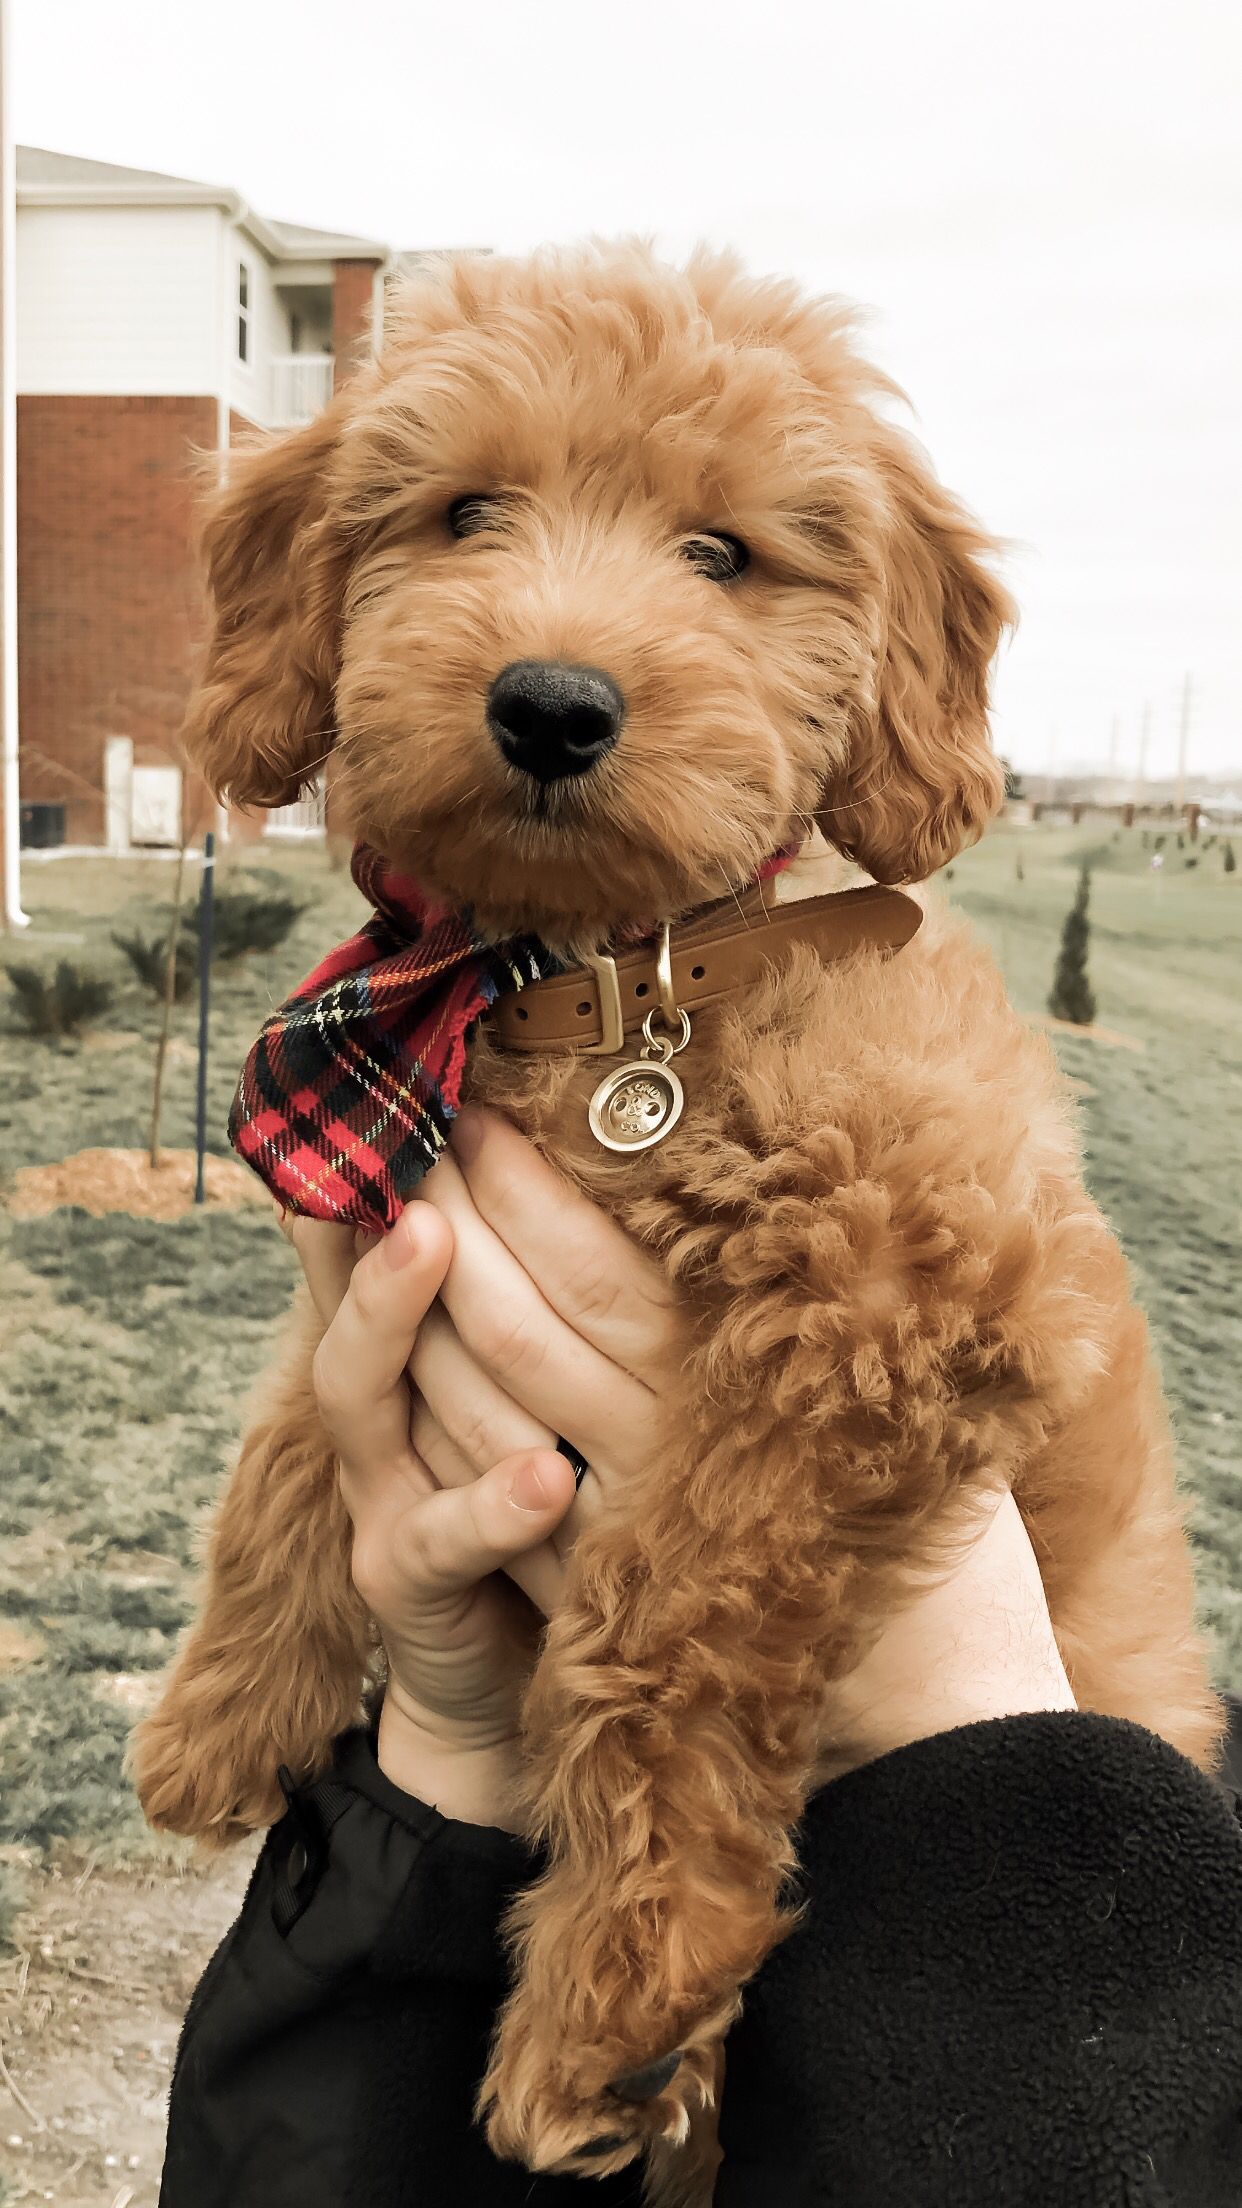 Goldendoodle Puppy. Goldendoodle puppy, Mini goldendoodle puppies, Cute dogs and puppies